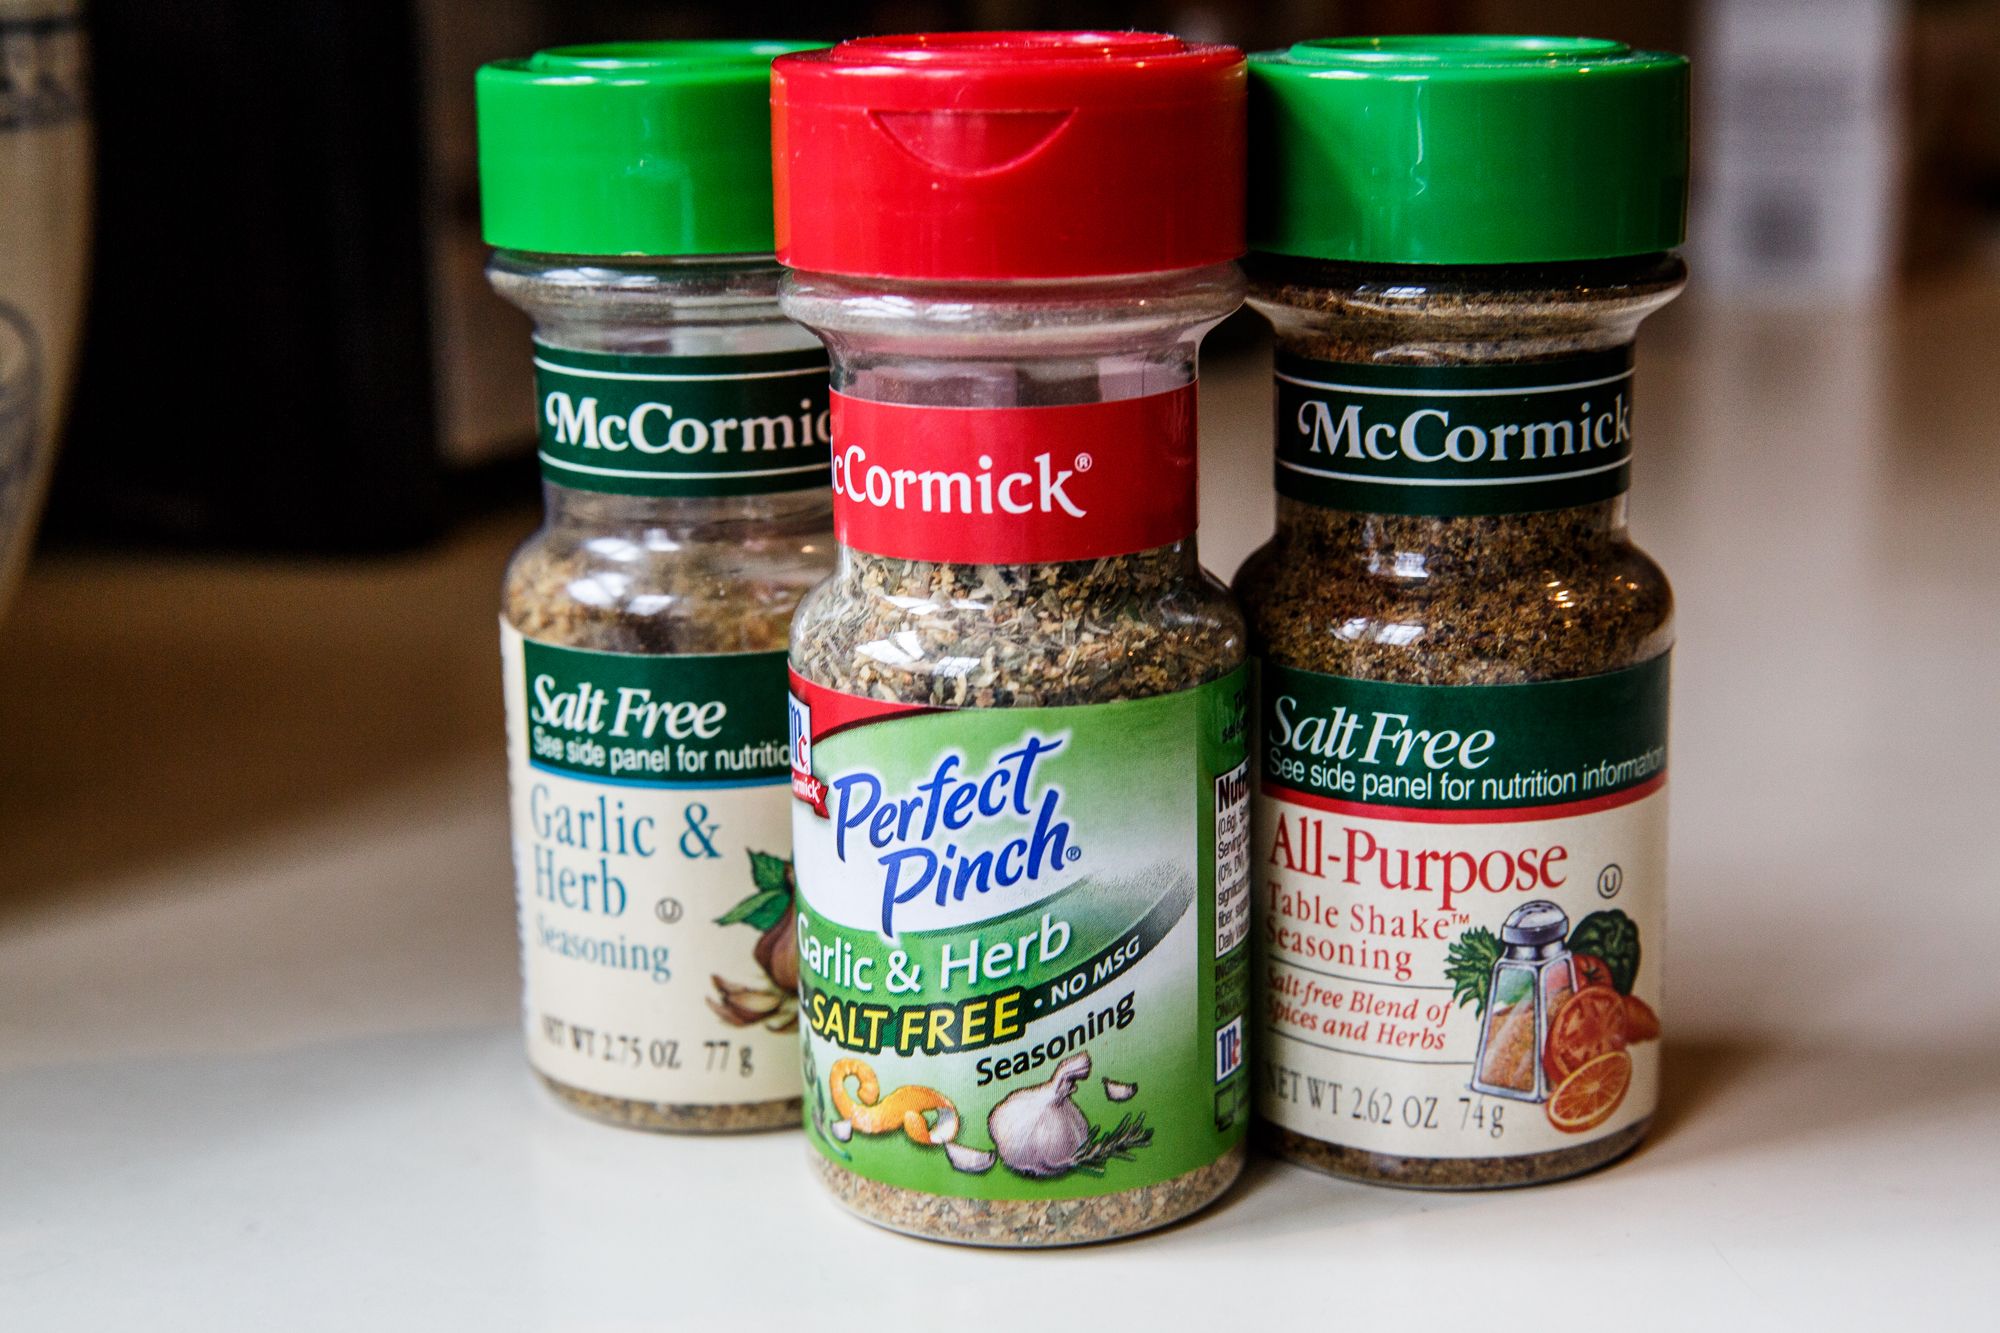 Are your spices old? How to tell if you should throw them out